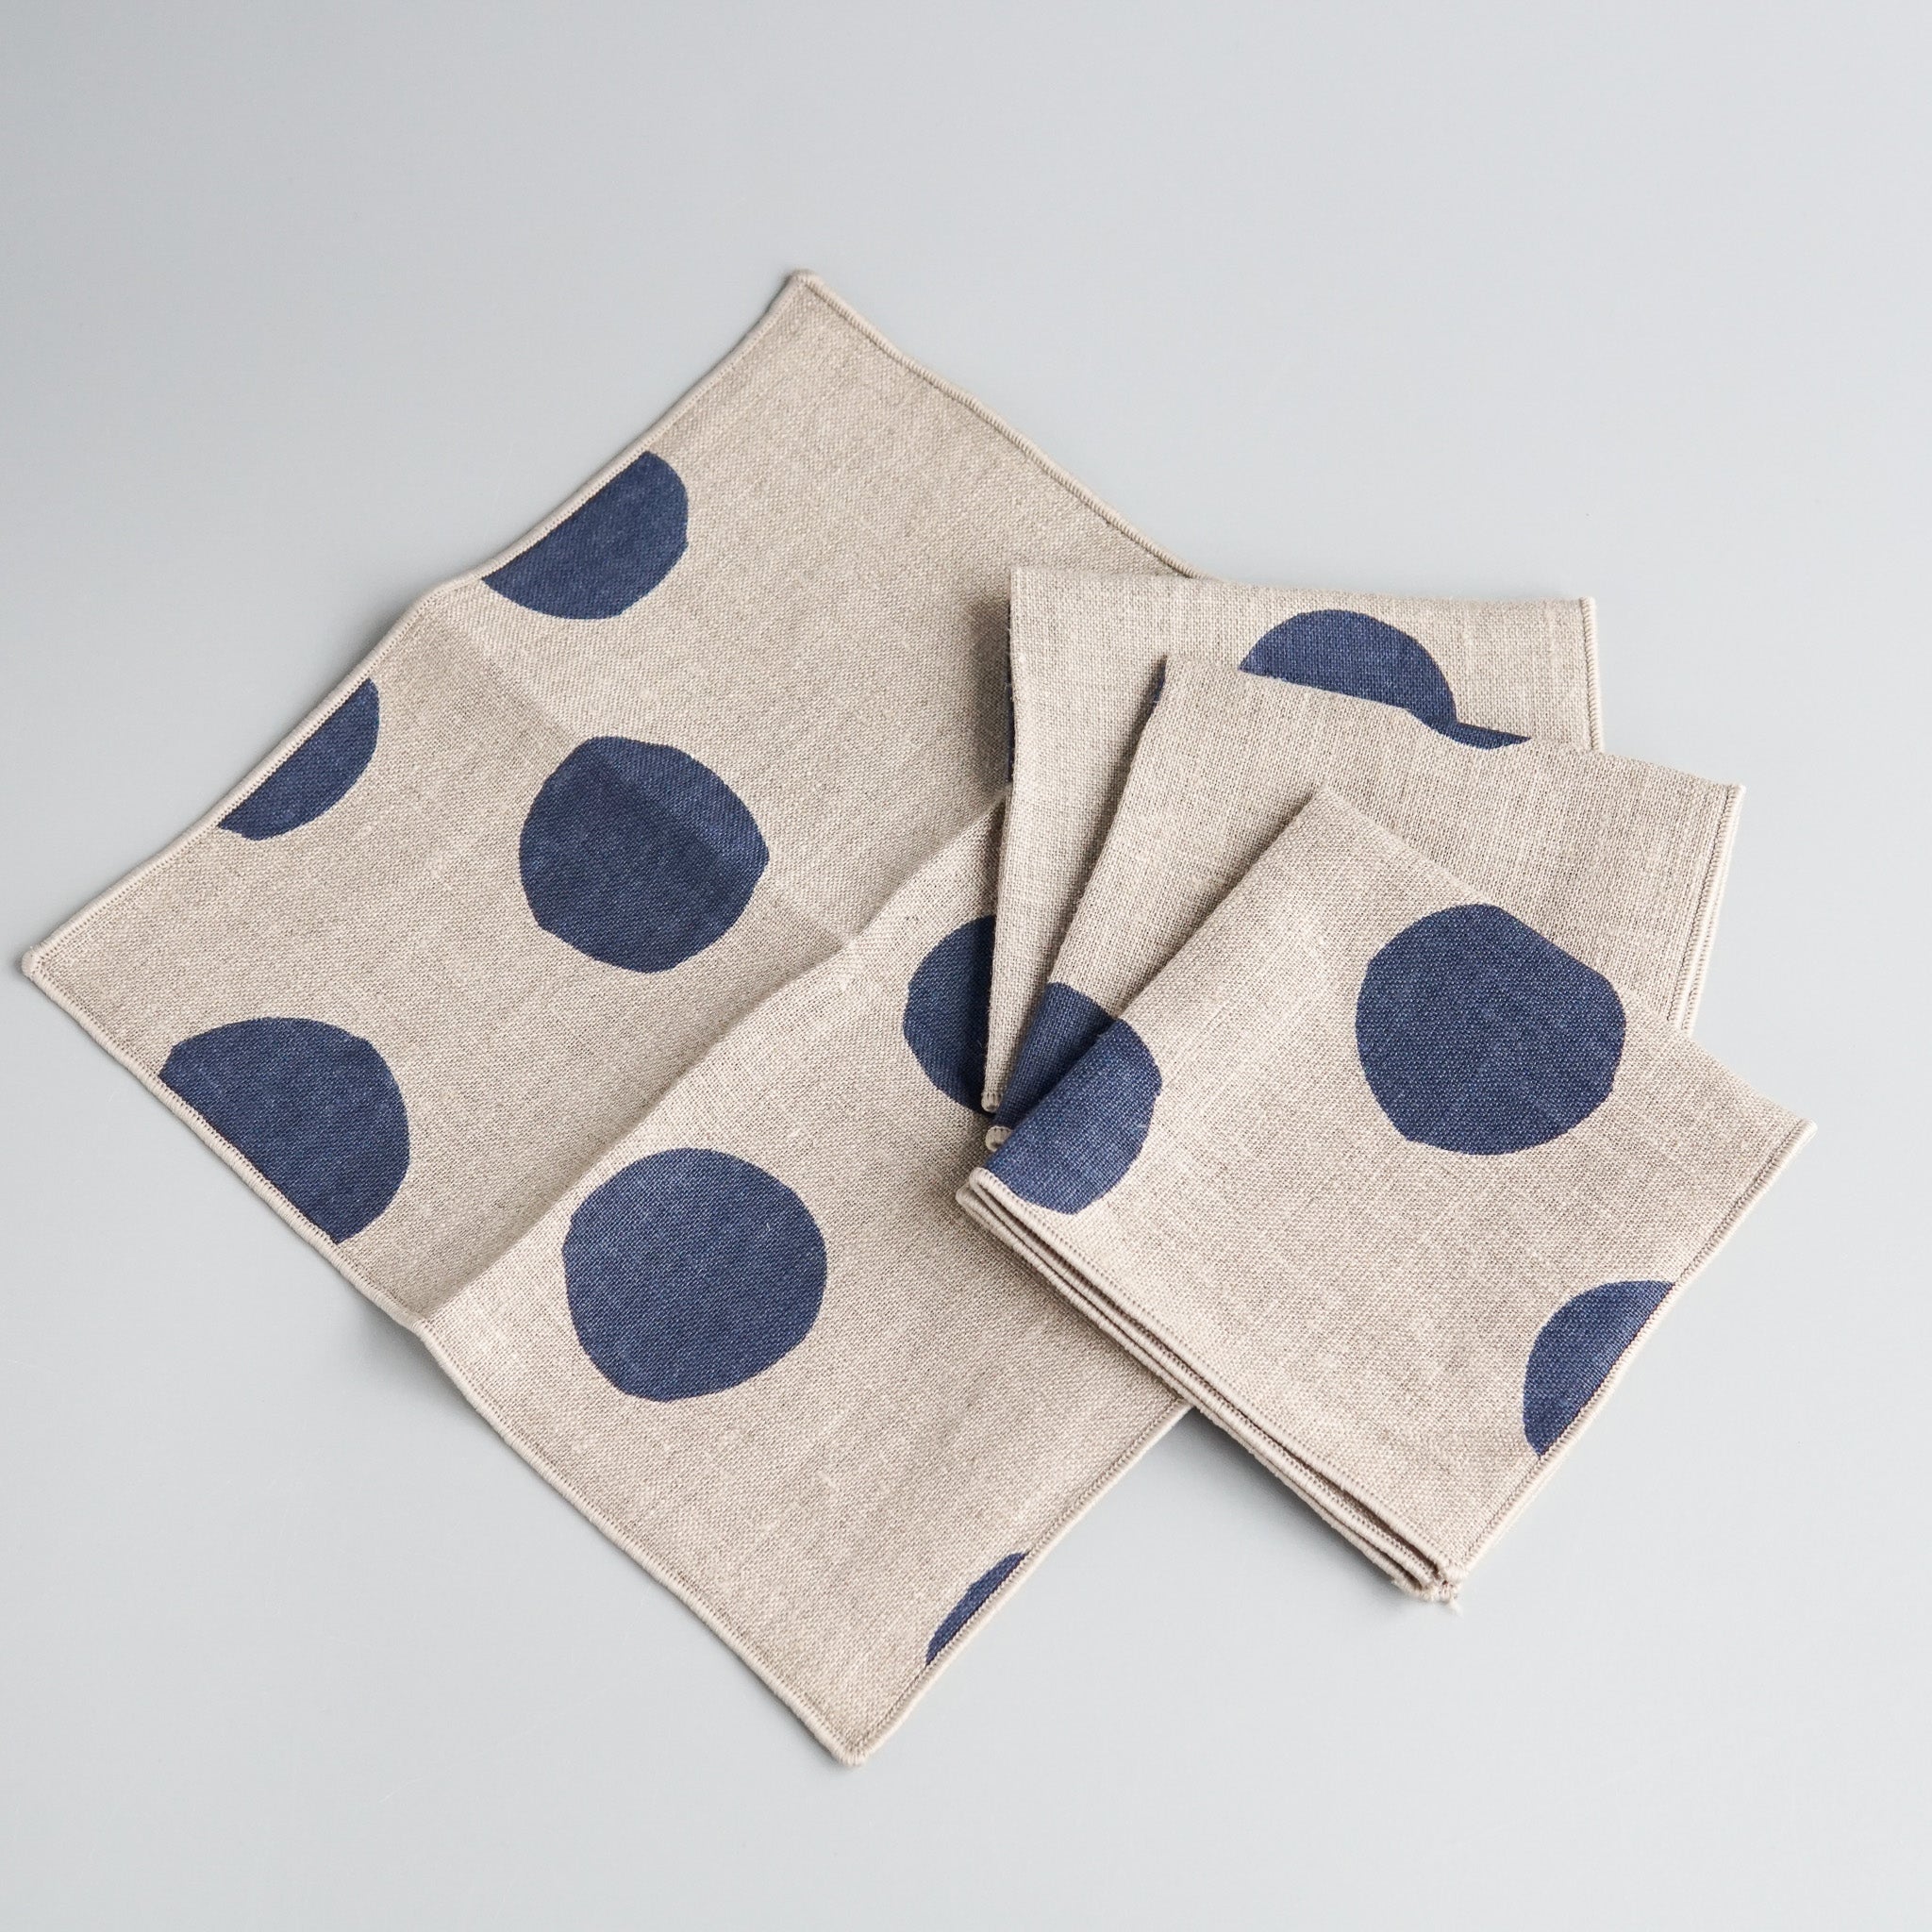 Willow Ship: Scatter Cocktail Napkins in Indigo